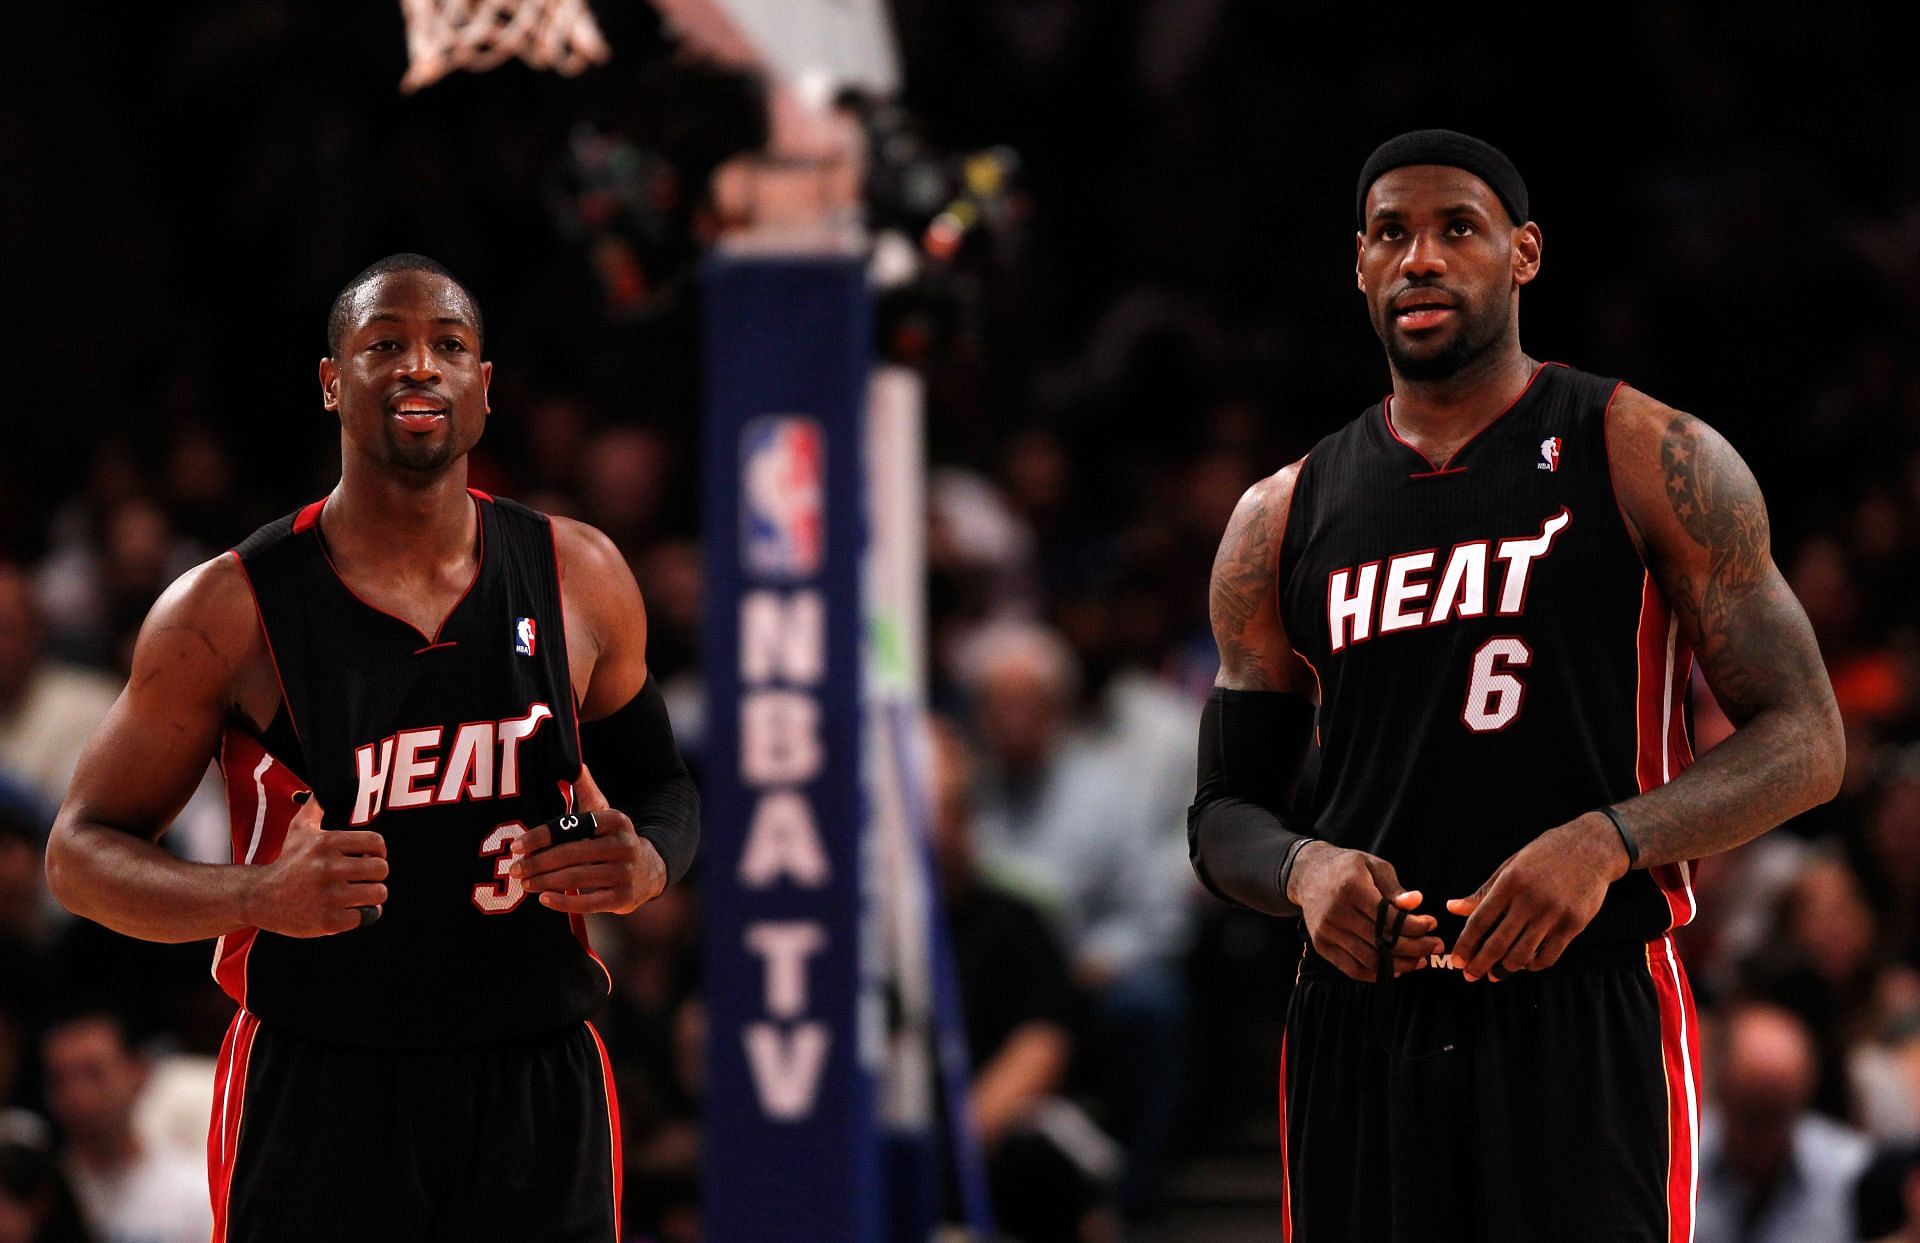 LeBron James and Dwyane Wade are the best players from the 2003 NBA draft (Image via Getty Images)